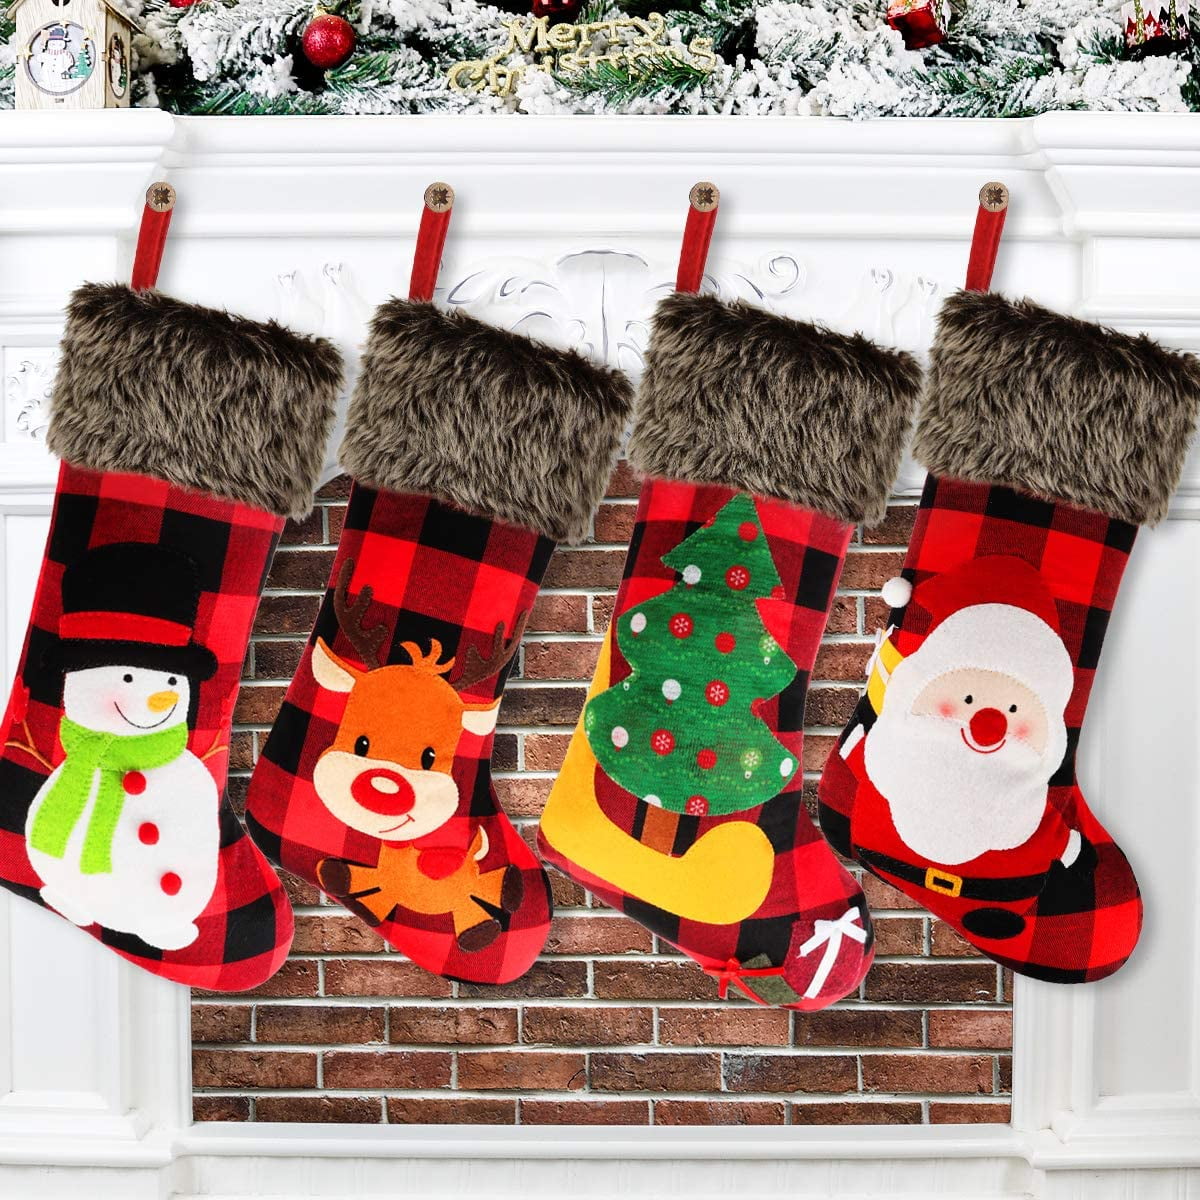 Yostyle Christmas Stockings Burlap Plaid Style with Snowflake Santa Snowman Reindeer and Plush Faux Fur Cuff Family Pack Stockings for Xmas Holiday Party Decor 4 Pack 18 Big Xmas Stockings